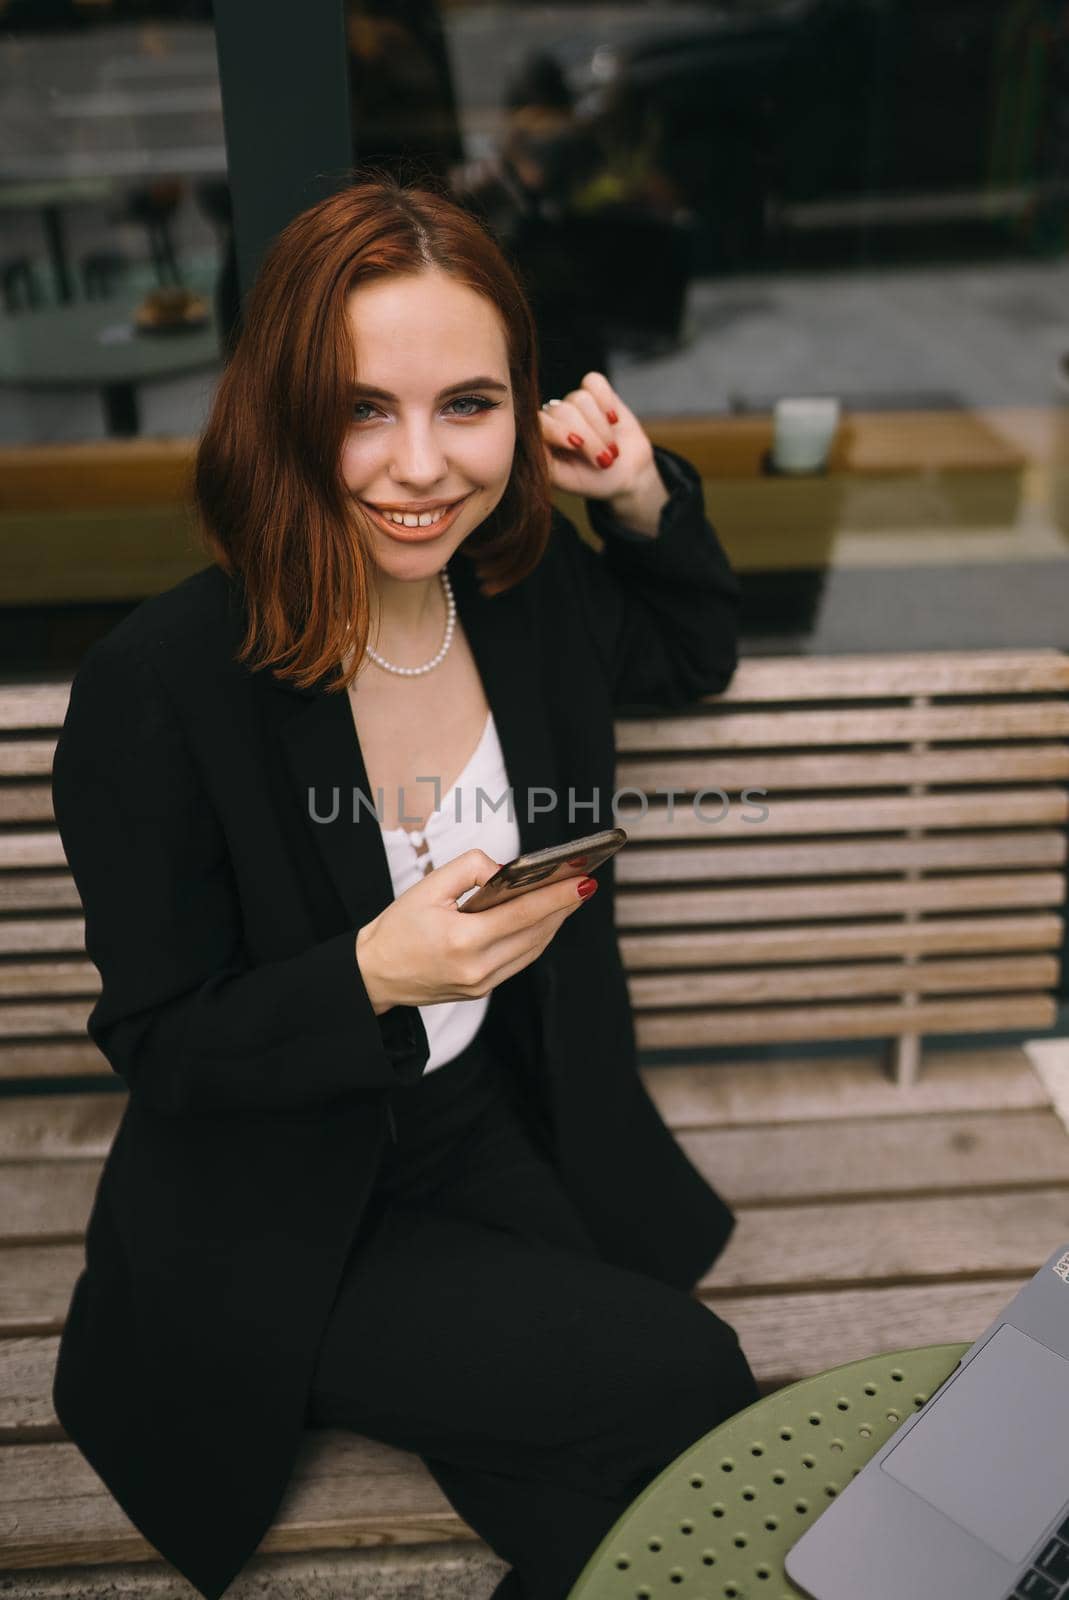 Attractive brunette woman at the street cafe reading a text messageon a phone.